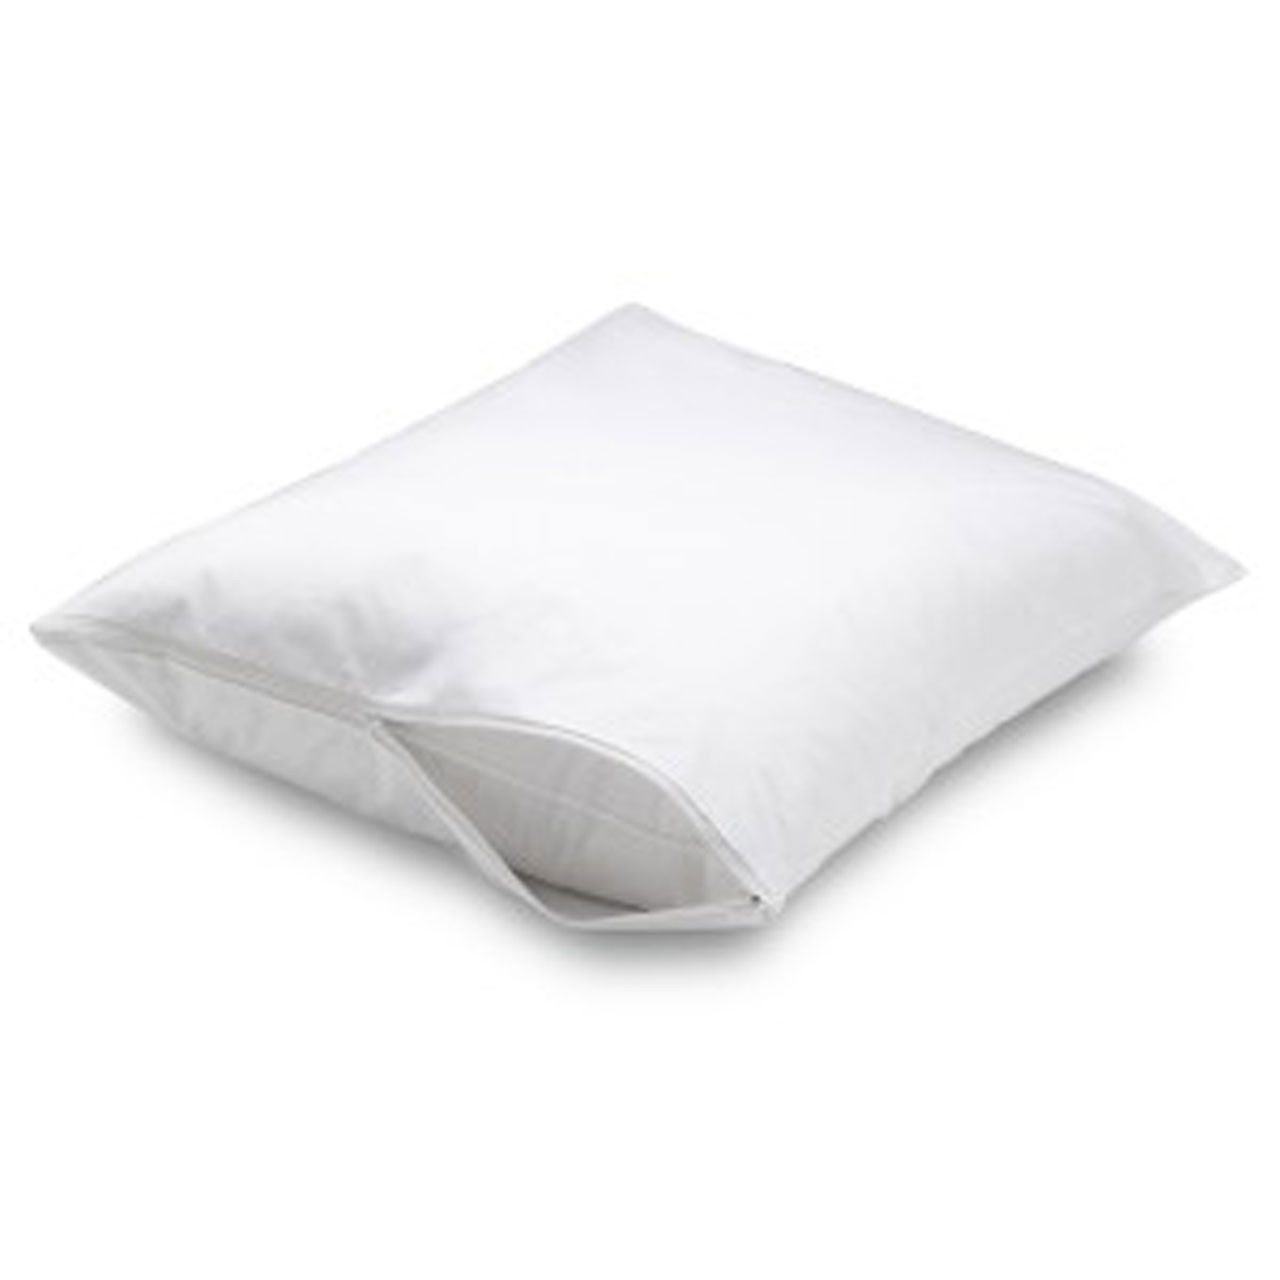 Do bulk pillow protectors with zipper closures have any benefits?